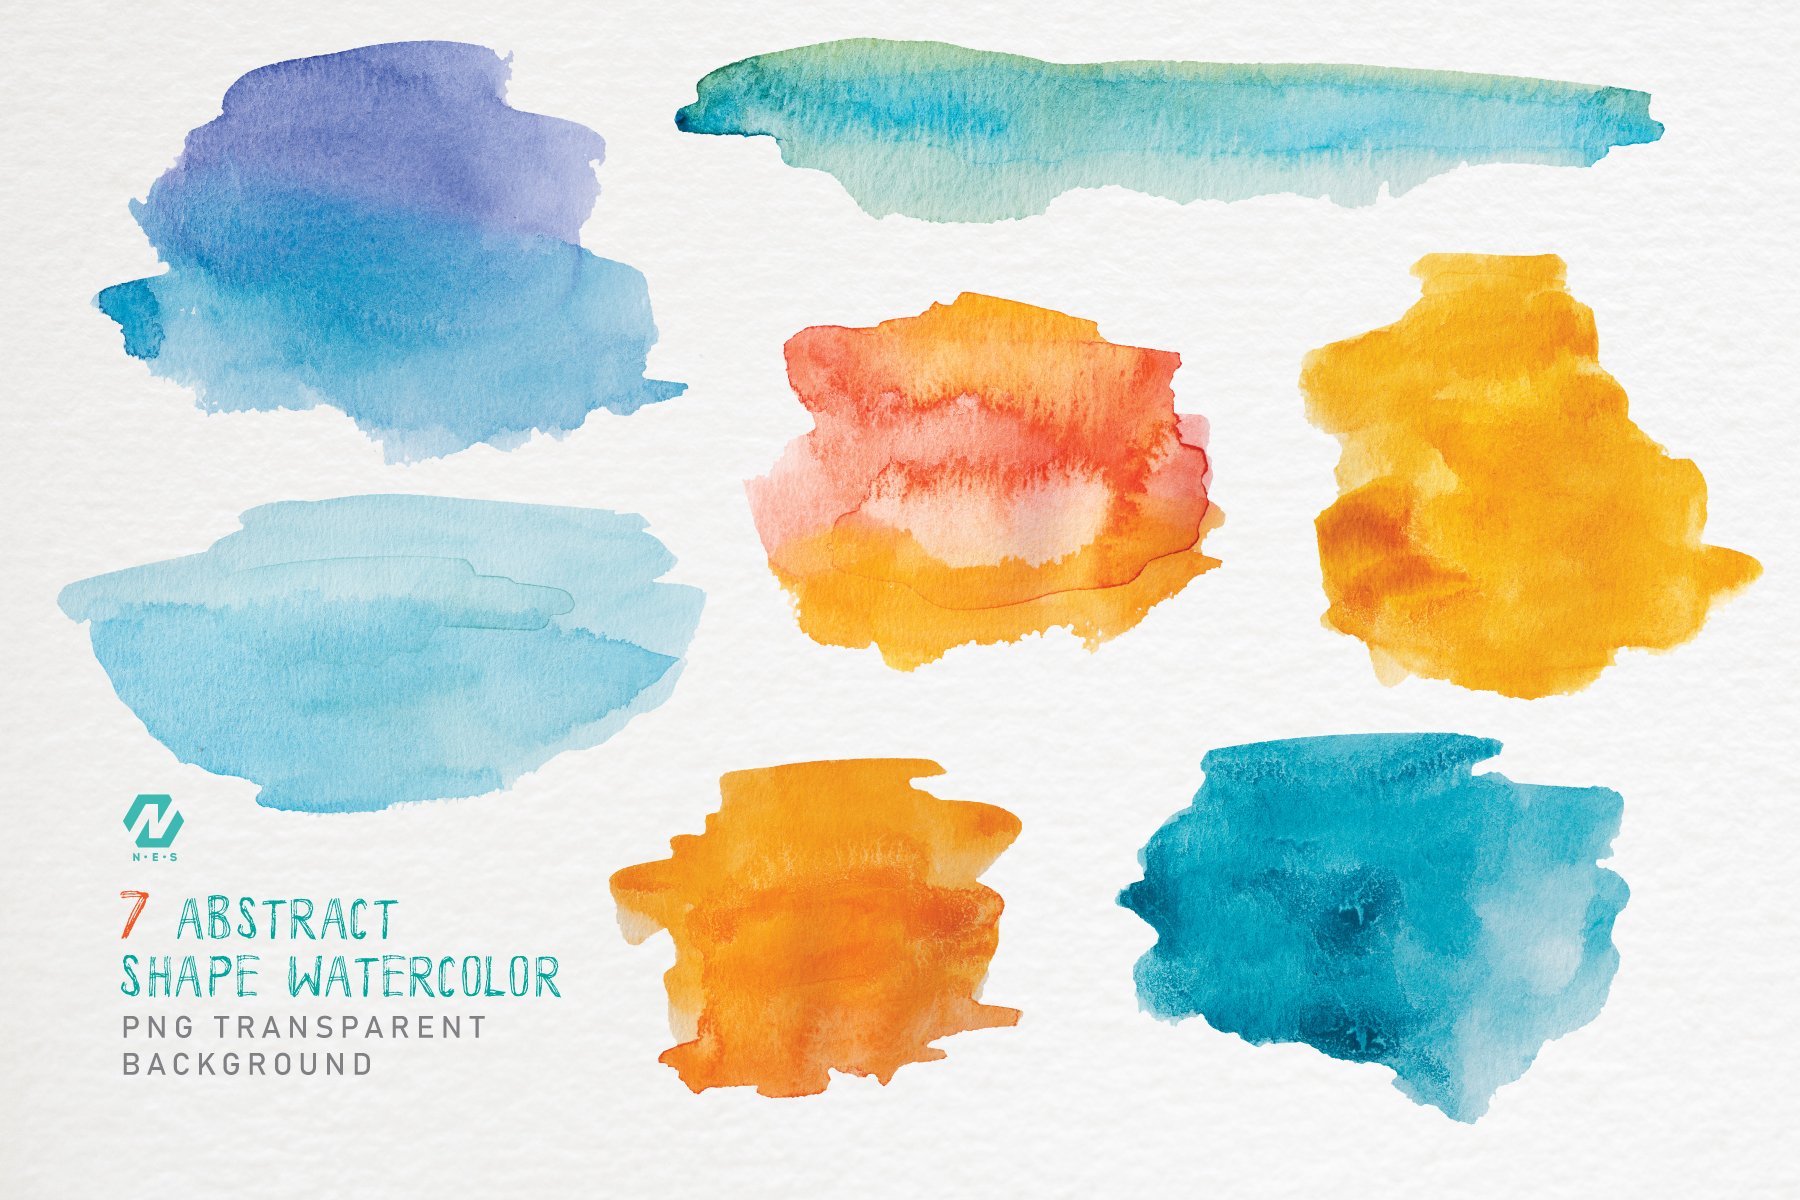 Watercolor Summer Clipart Set of 20 Files by ArtisticTimberStudio